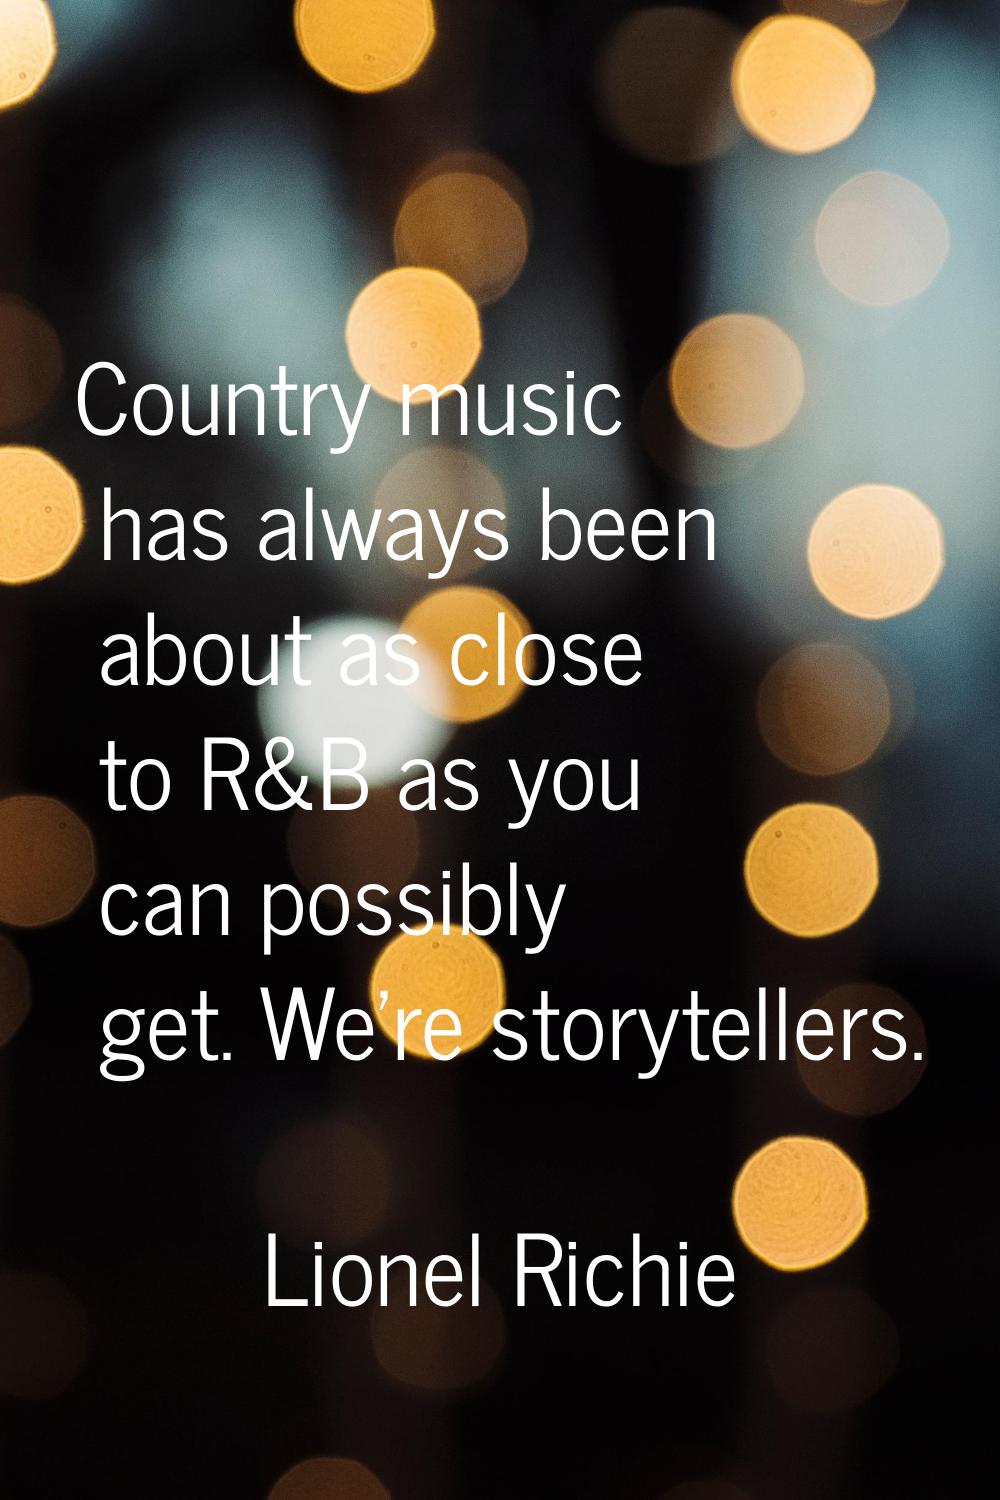 Country music has always been about as close to R&B as you can possibly get. We're storytellers.